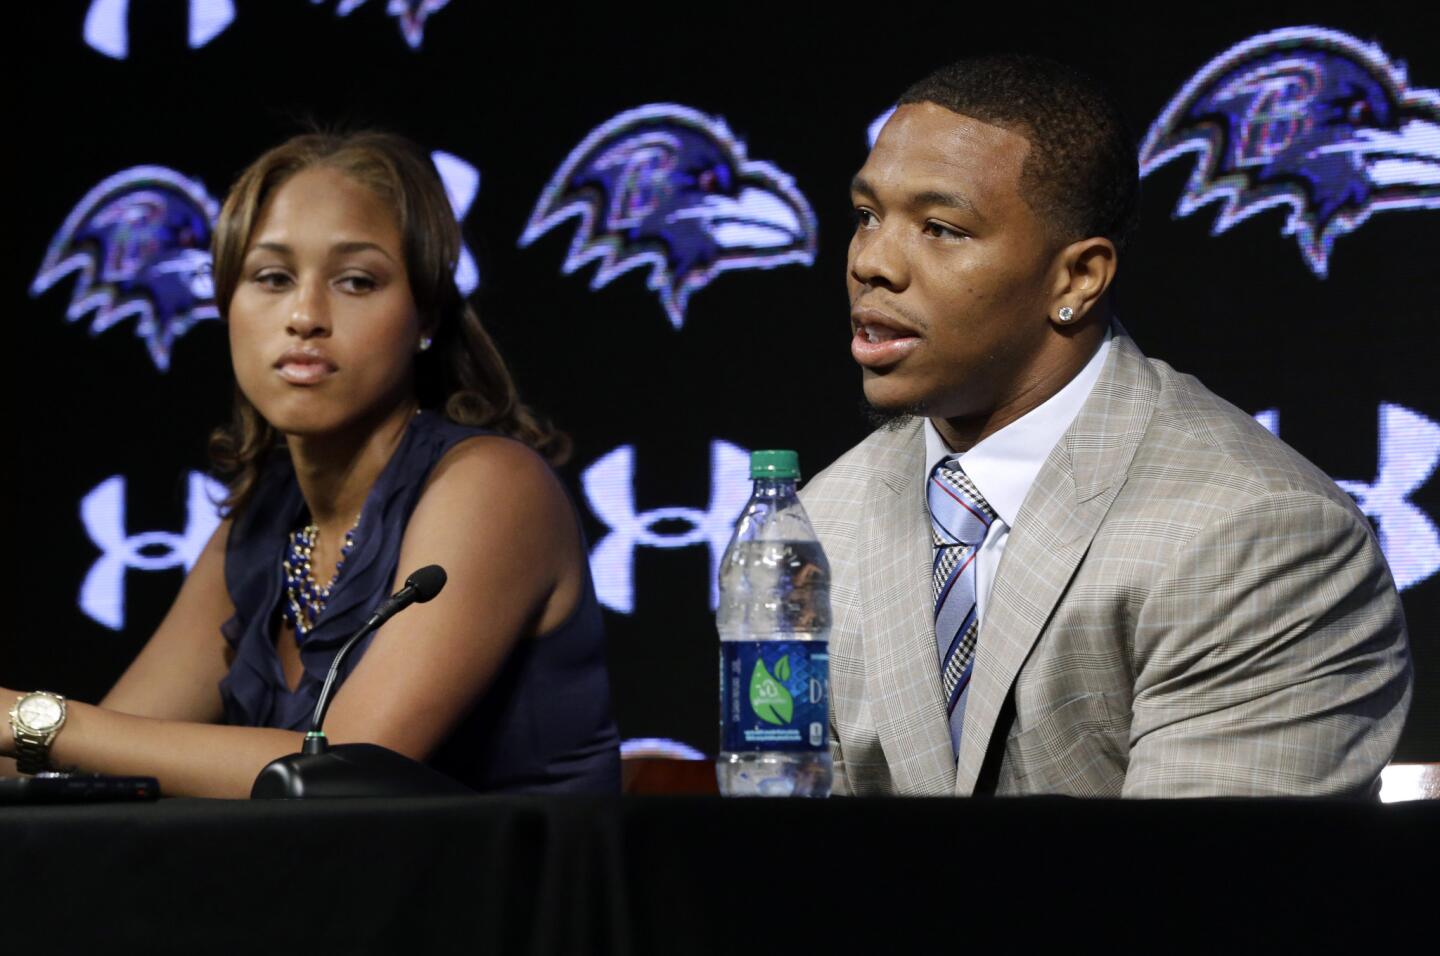 Ex-Ravens running back Ray Rice, shown in May with his wife Janay, was suspended indefinitely after video of Rice knocking out his then-fiance in an elevator became public. Rice's suspension was vacated after a successful appeal, the Associated Press reported.